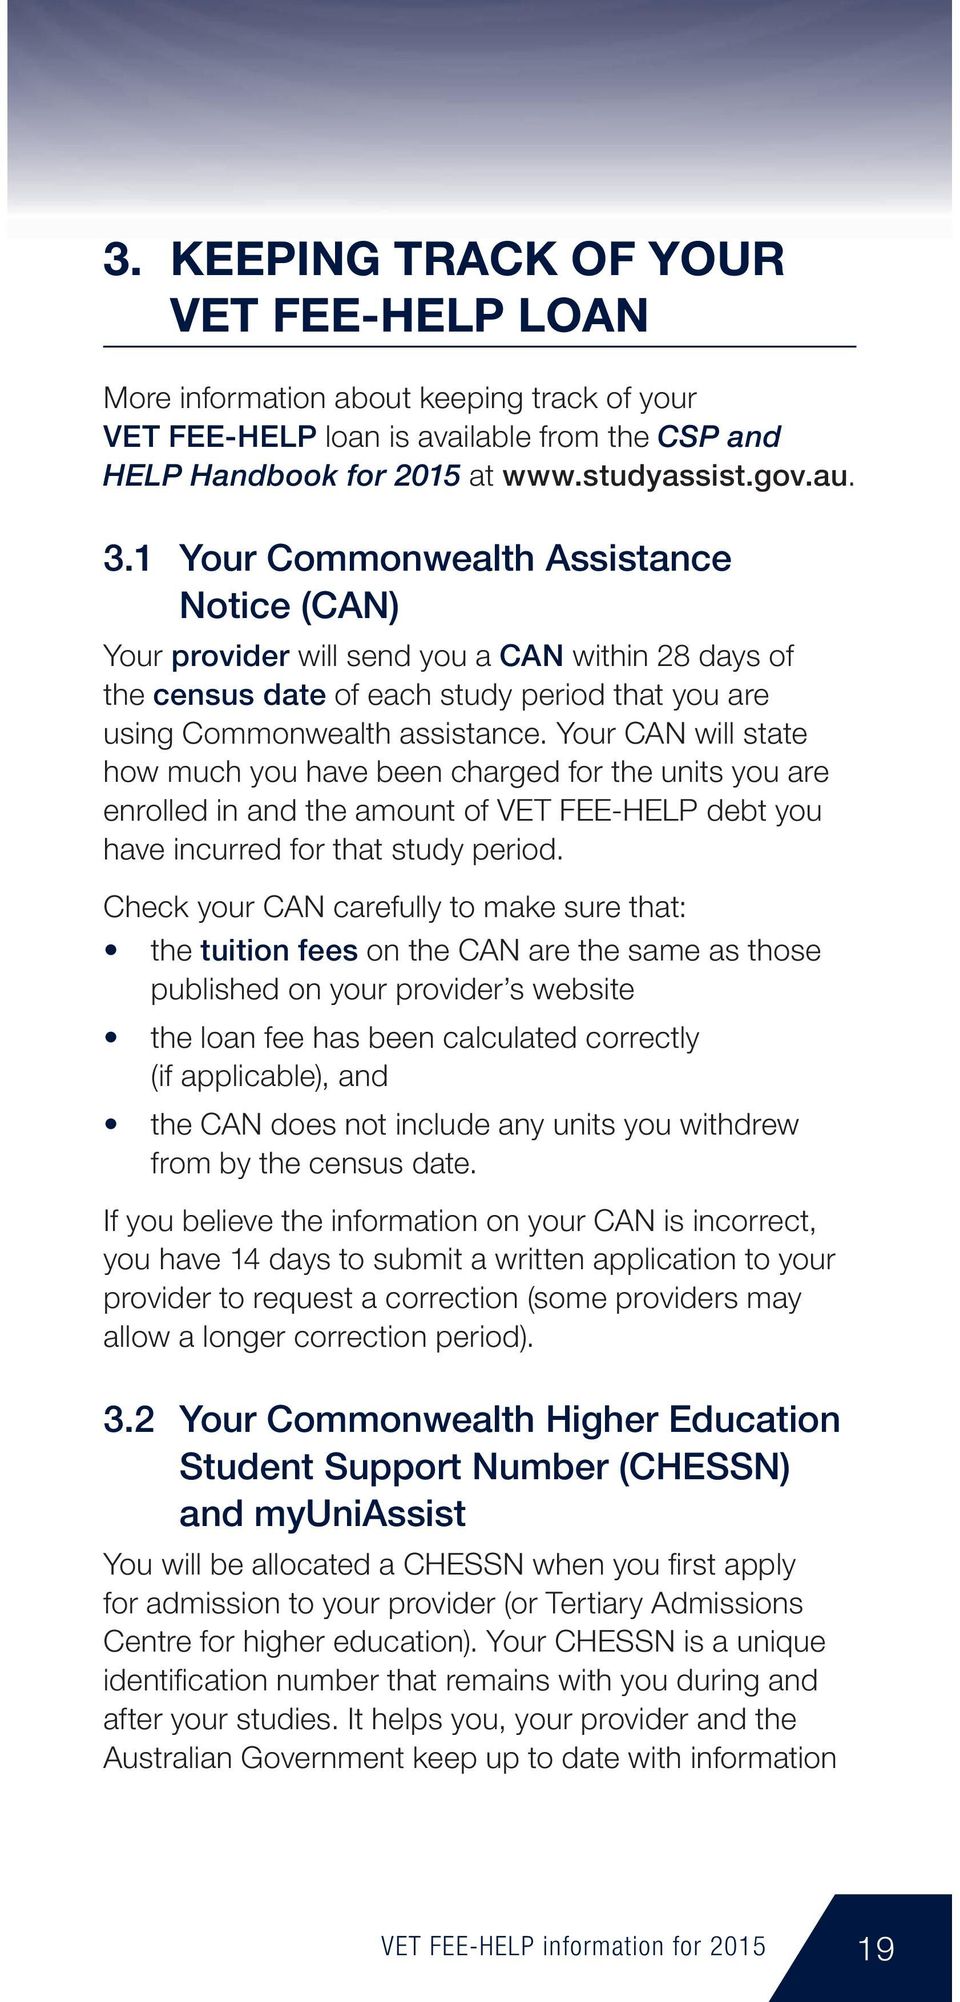 Your CAN will state how much you have been charged for the units you are enrolled in and the amount of VET FEE-HELP debt you have incurred for that study period.